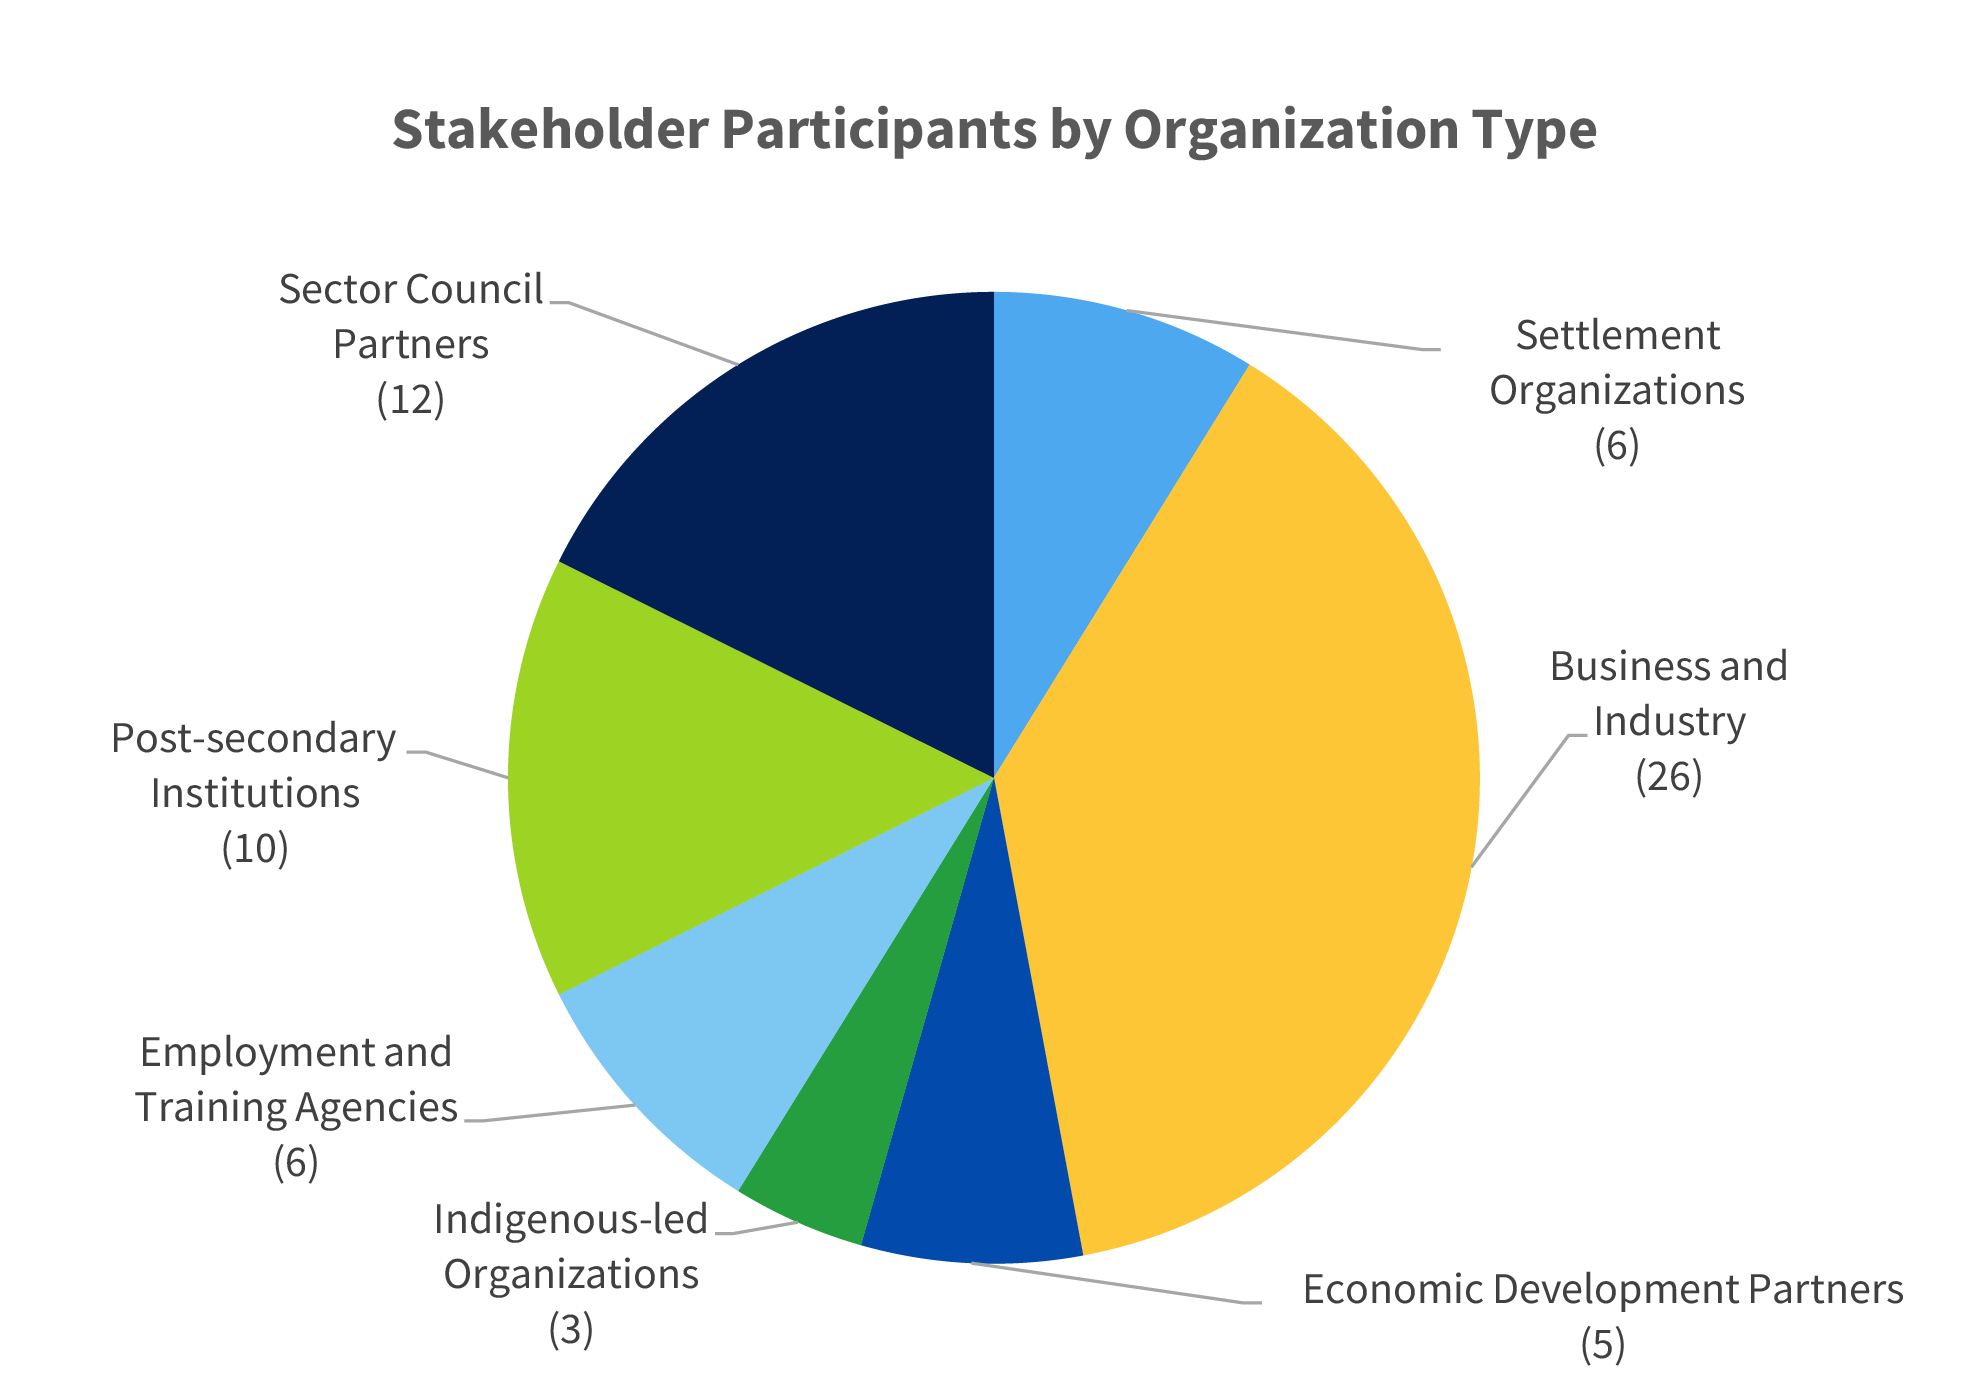 Pie graph showing Stakeholder Participants by Organization Type: Sector Council Partners (12); Post-secondary institutions (10); Employment and Training Agencies (6); Indigenous-led Organizations (3); Settlement Organizations (6); Business and Industry (26); Economic Development Partners (5)